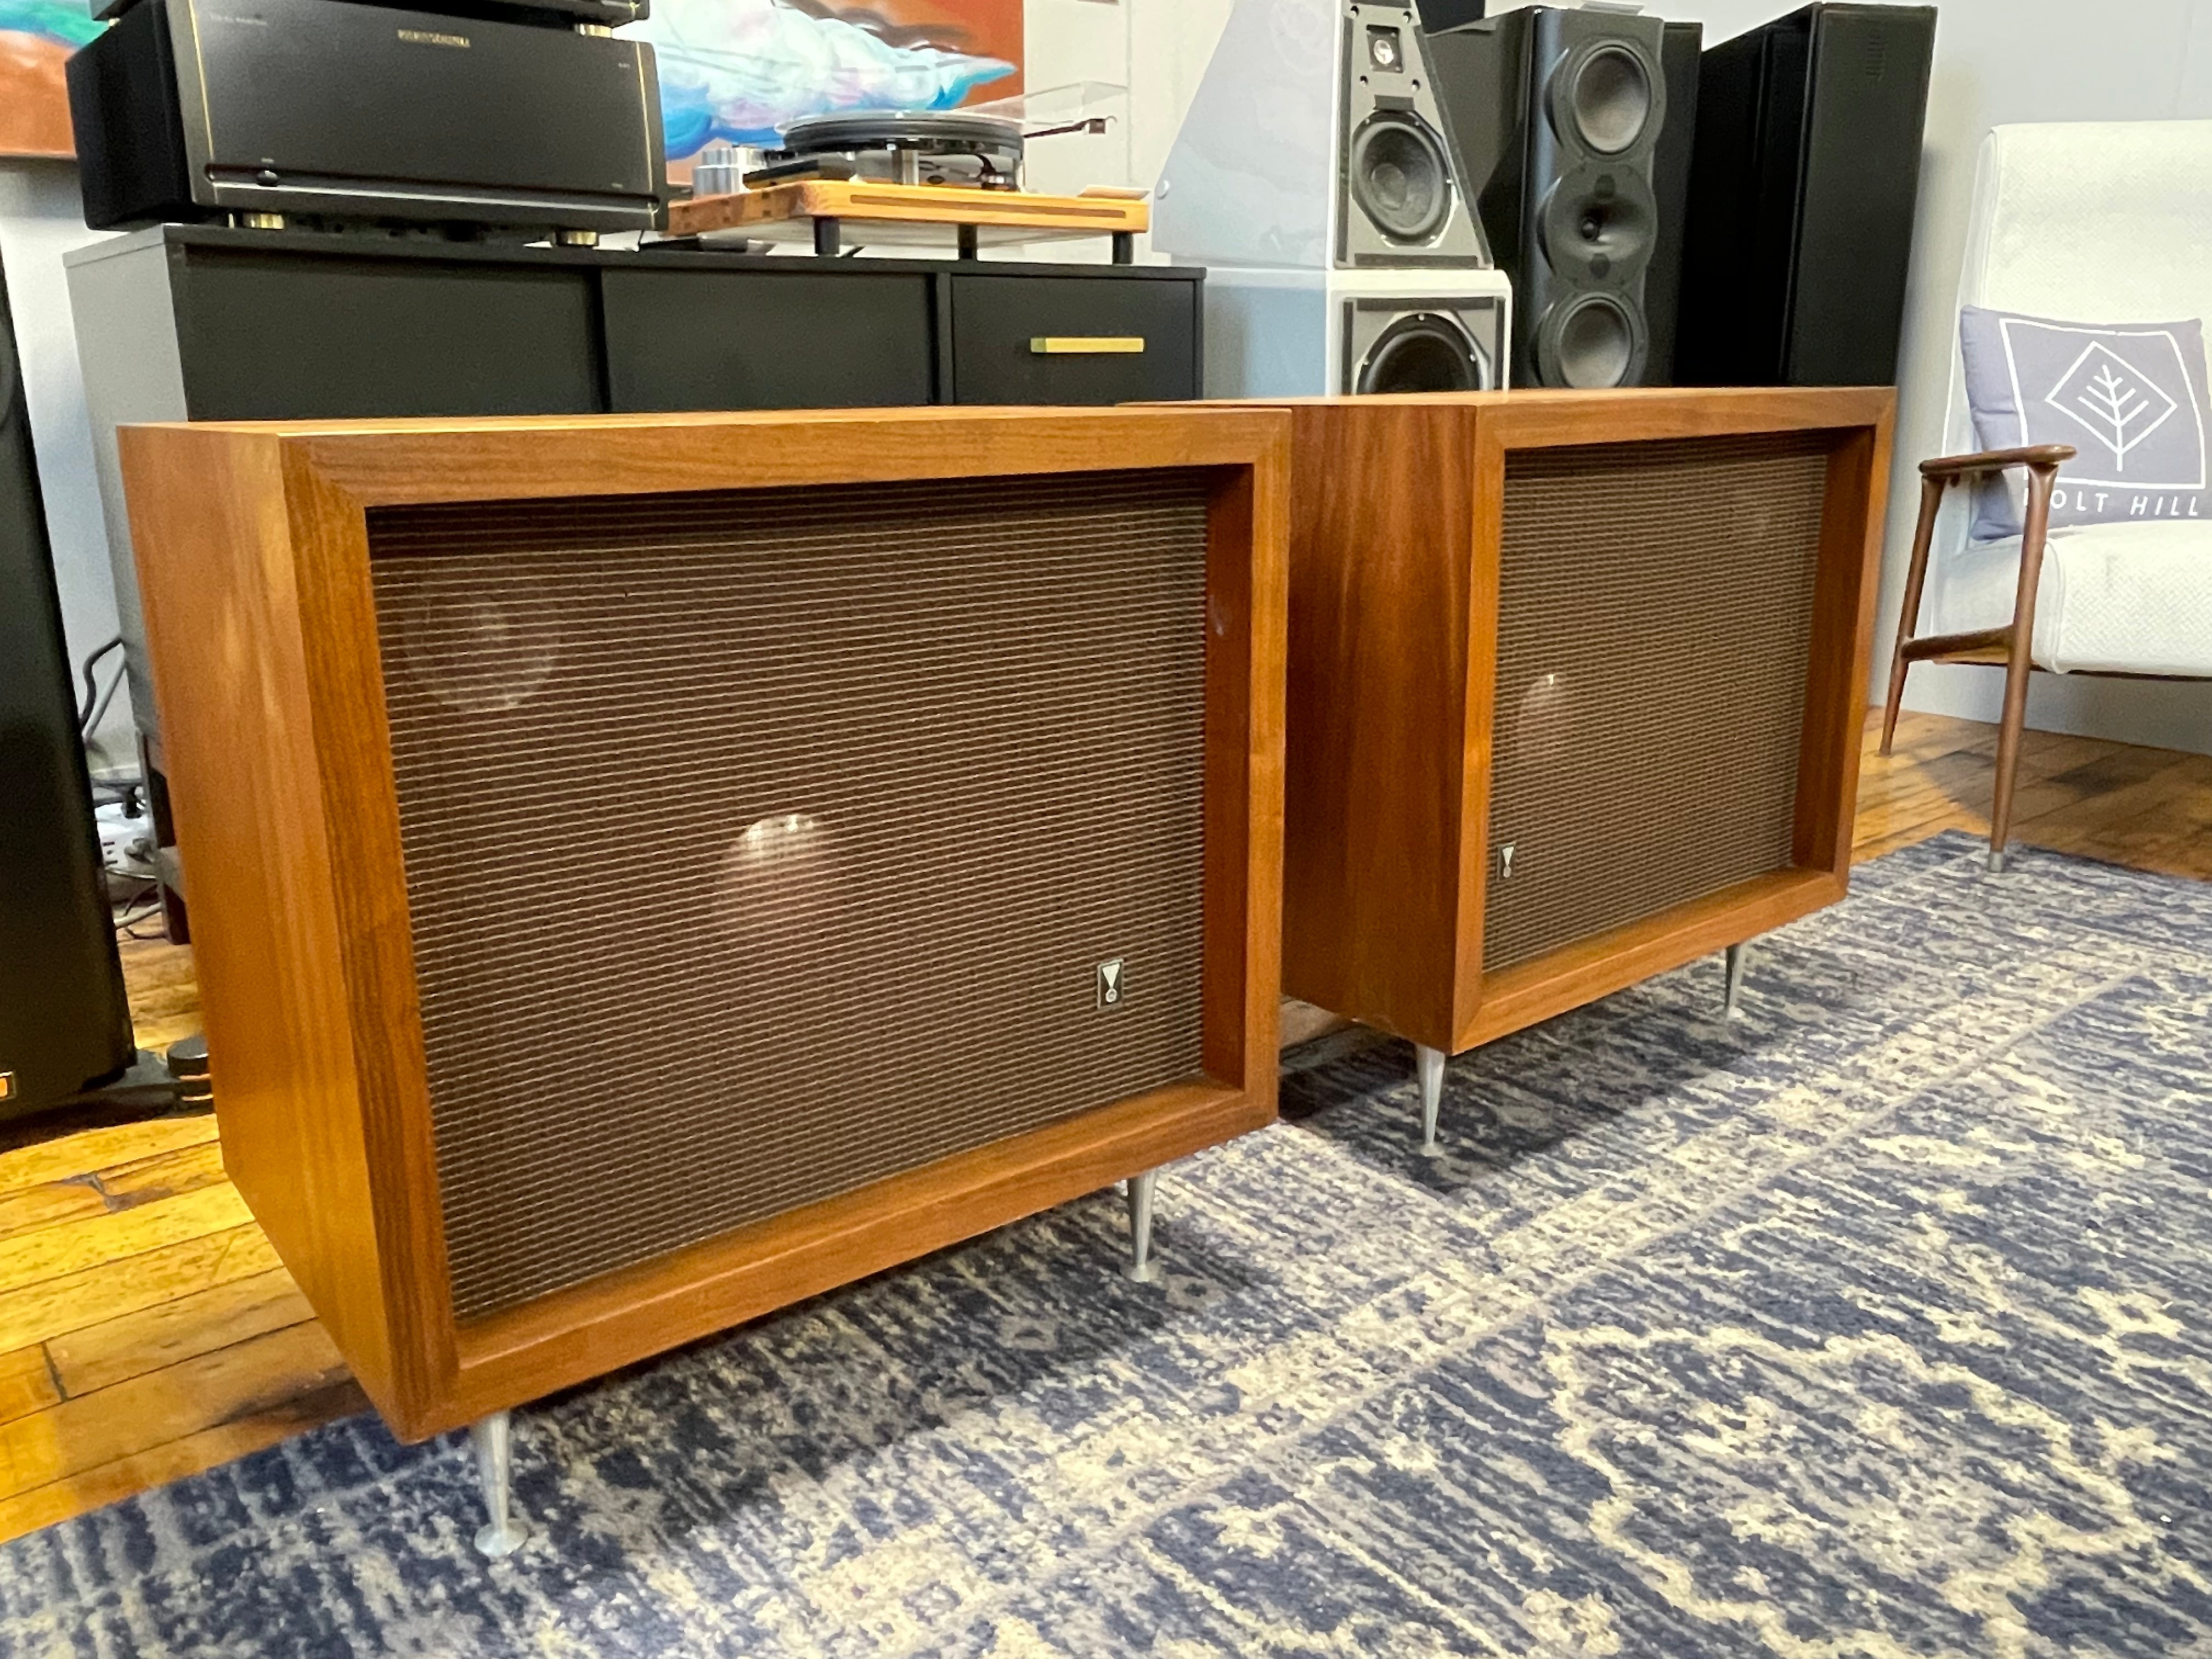 JBL '030' C38 "The Baron" Speaker System - Amazing JBL MCM Cabinets... So Right Now!!